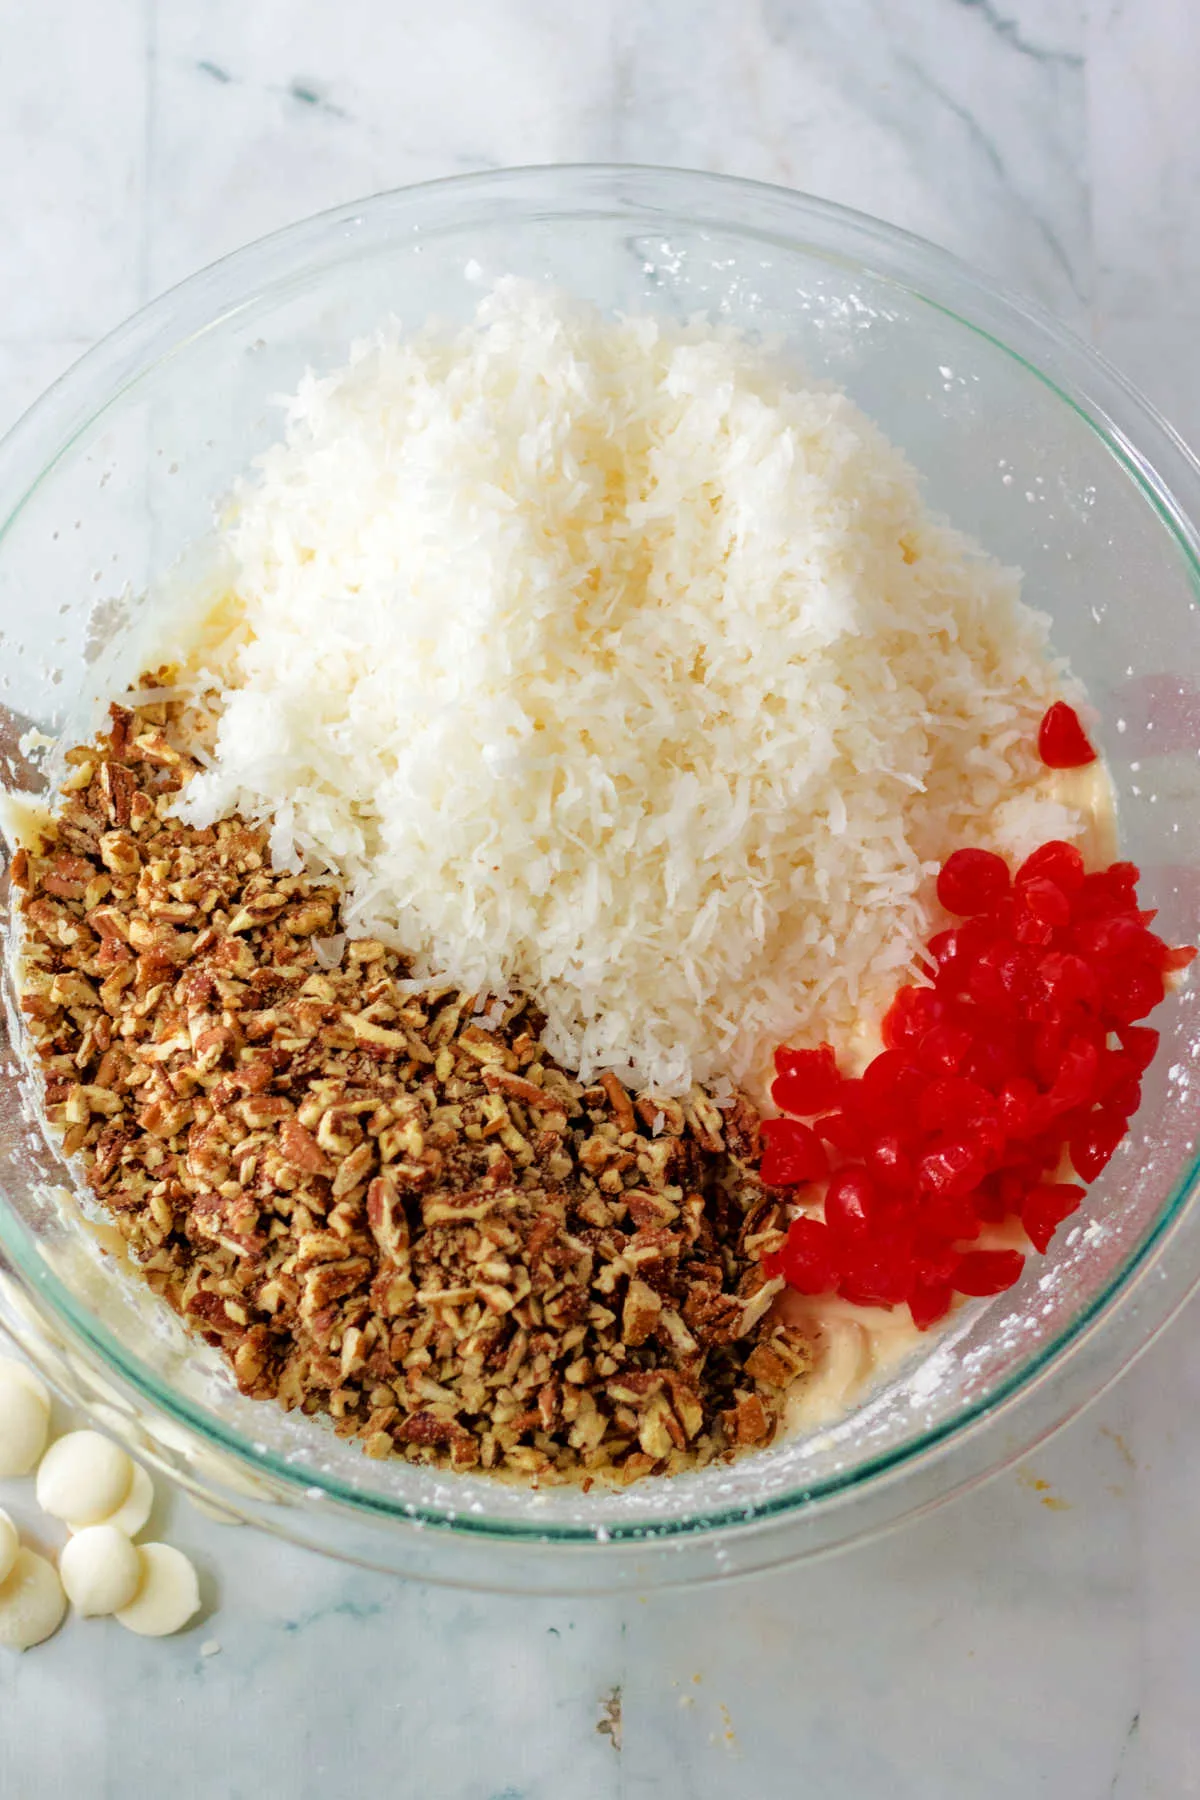 adding shredded coconut, chopped cherries and pecan bits to the butter and powdered sugar mixture.